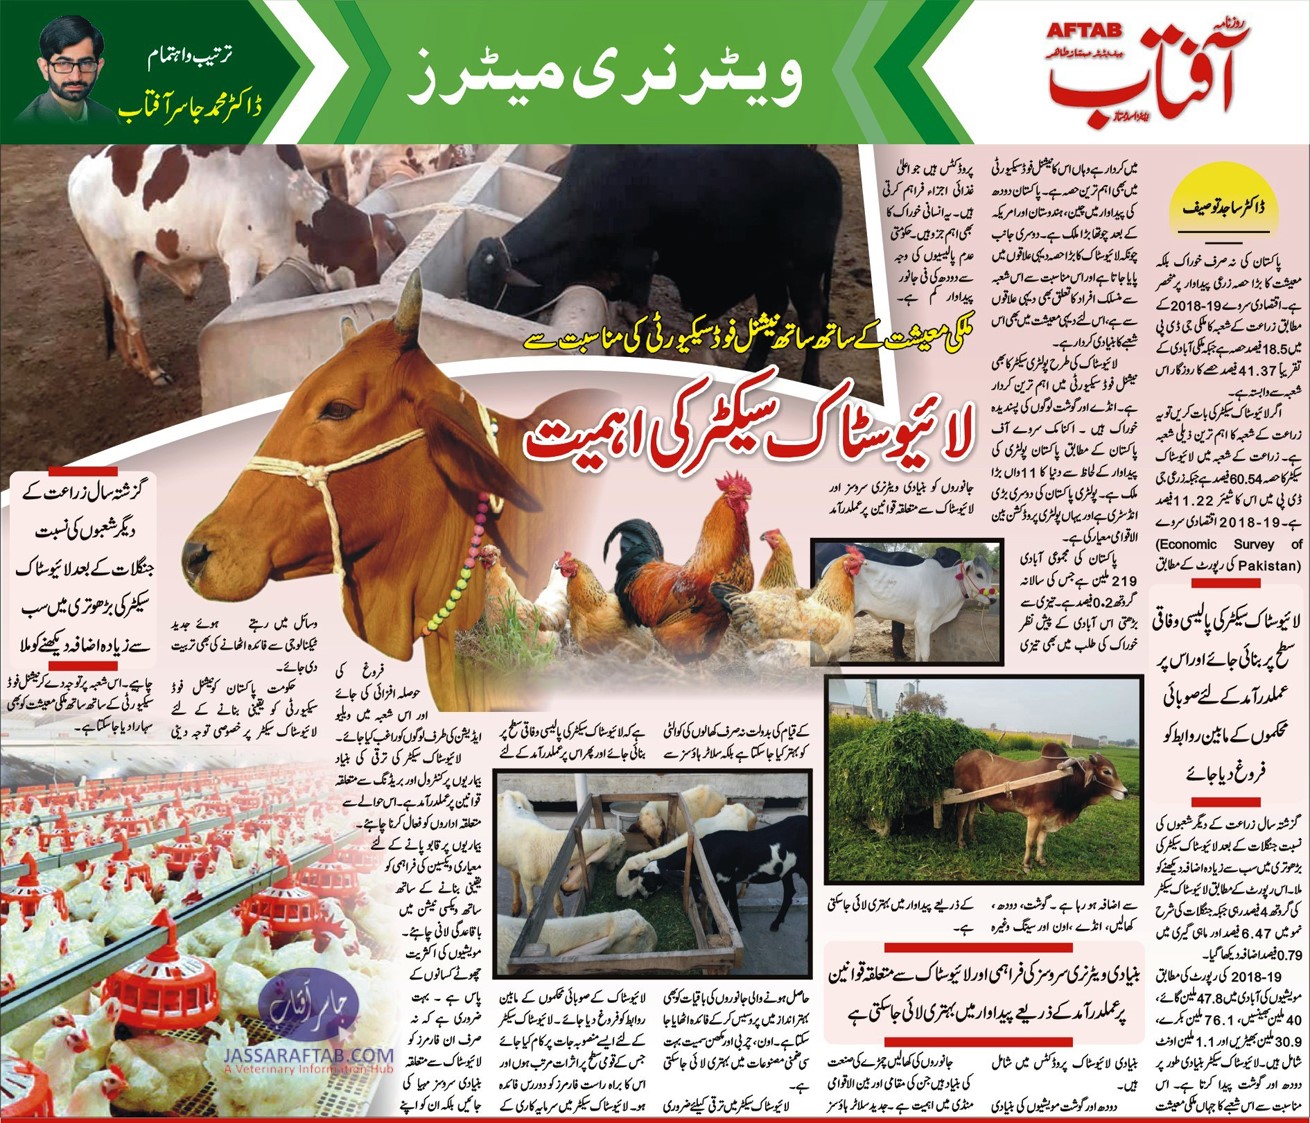 Importance of Livestock Sector in national food security 